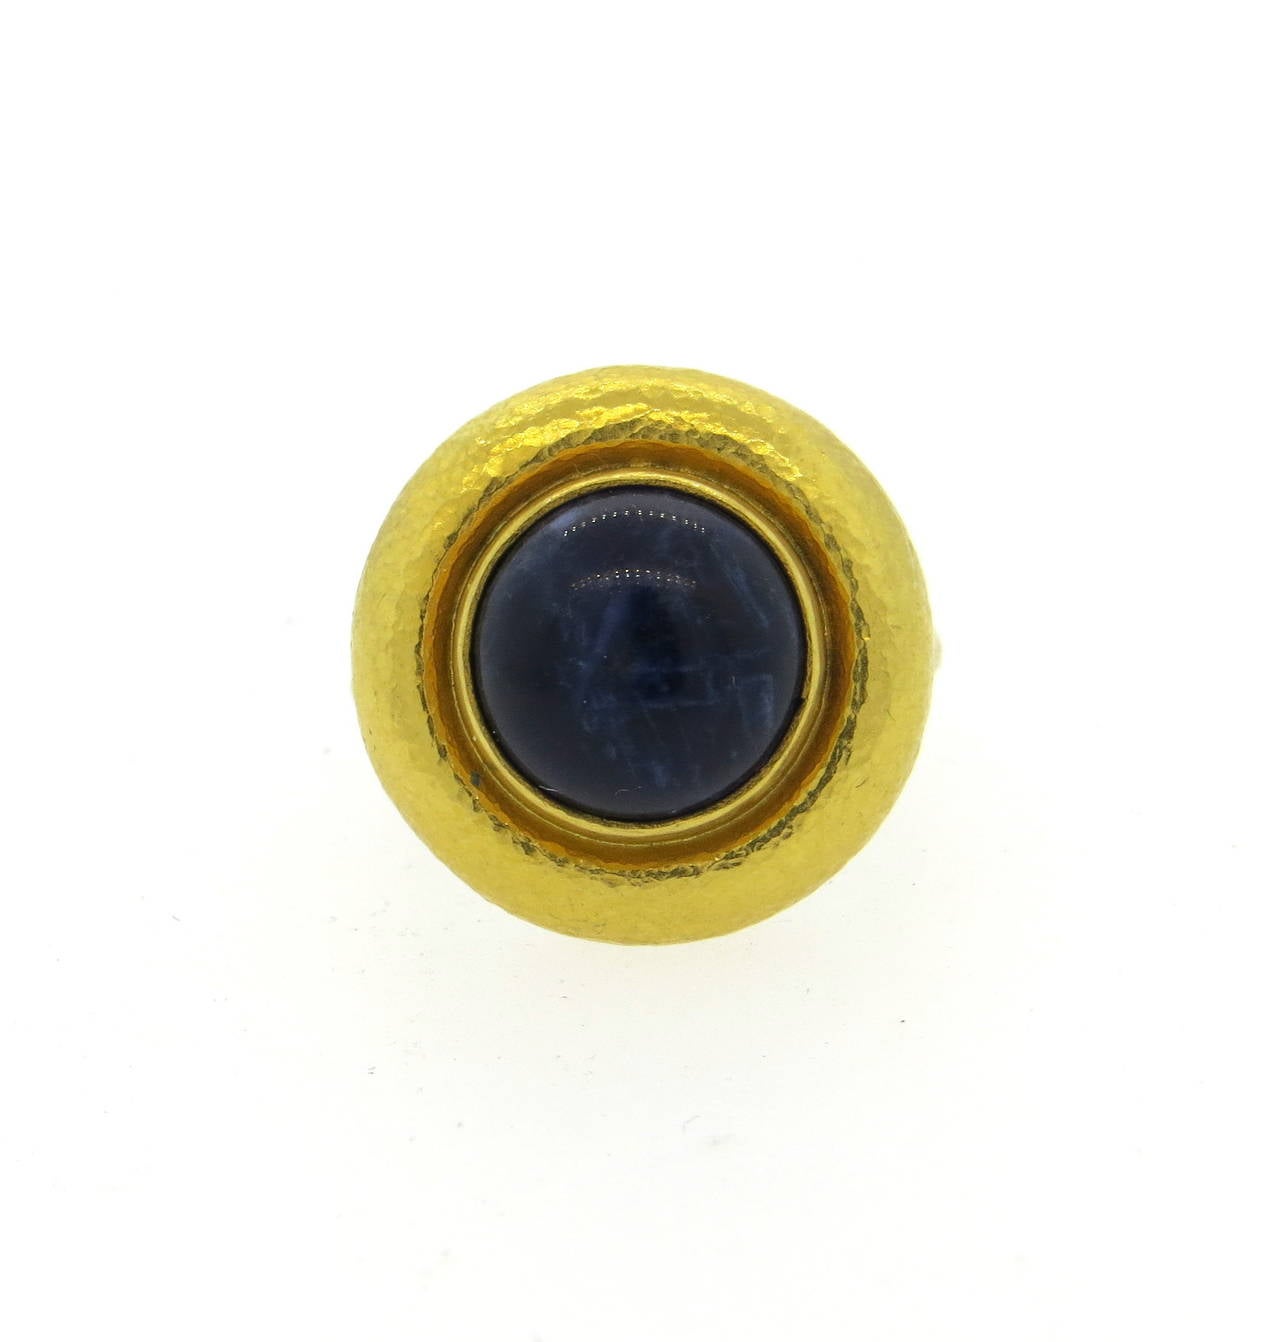 18k gold ring, crafted by Ilias Lalaounis, set with a 12.3mm blue stone in the center. Ring is a size 6 1/2, ring top is 21mm in diameter. Marked 750,Lalaounis mark. Weight -11 grams